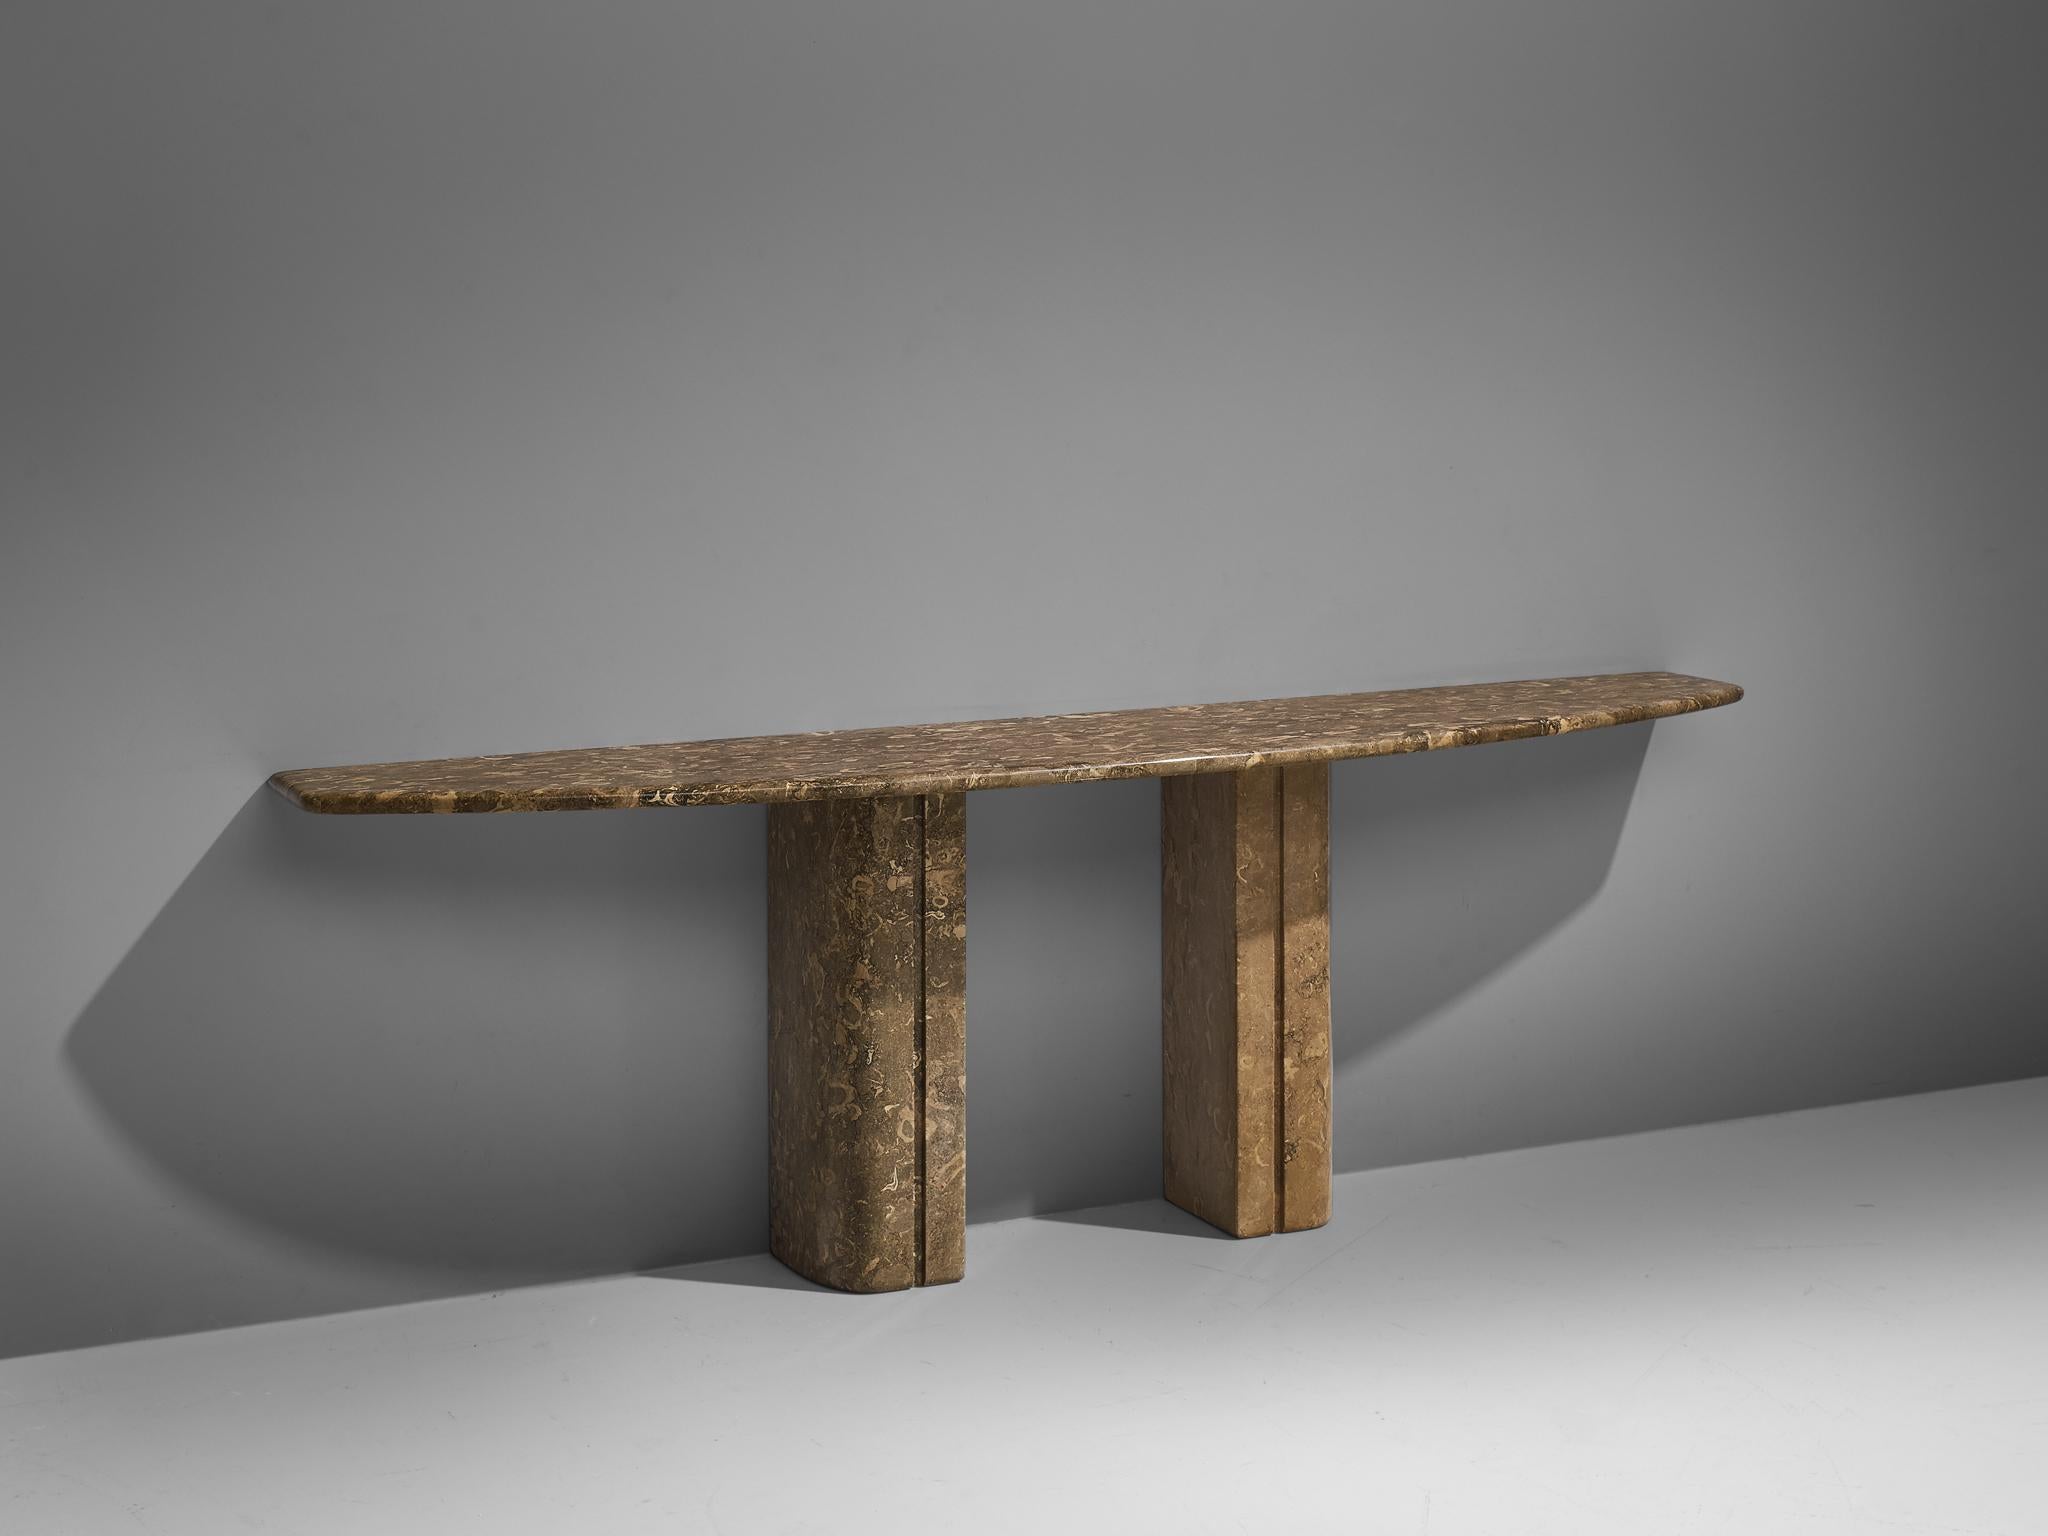 Console table, marble and metal, Italy, 1970s.

This console is a beautiful example of Italian design with an almost monumental appeal. The base of the table is formed out of two thick pillars. The rounded tabletop stretches out in a wonderful